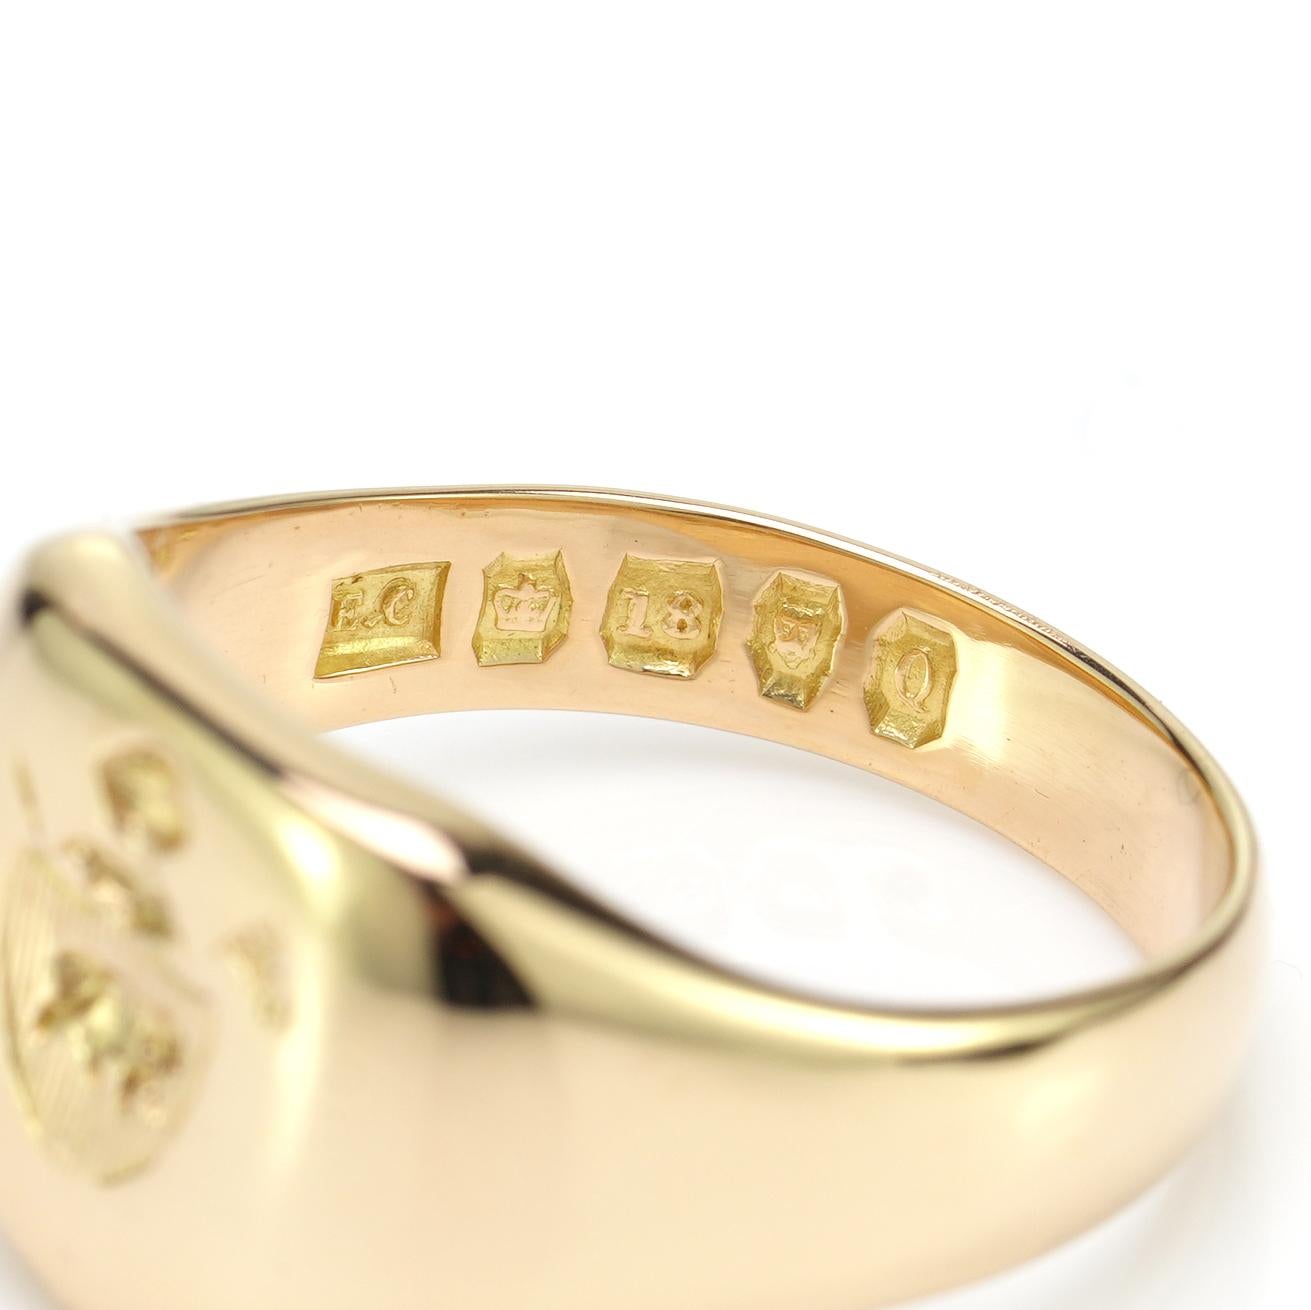 Vintage 18kt. Yellow Gold Signet Ring with Coat of Arms 6